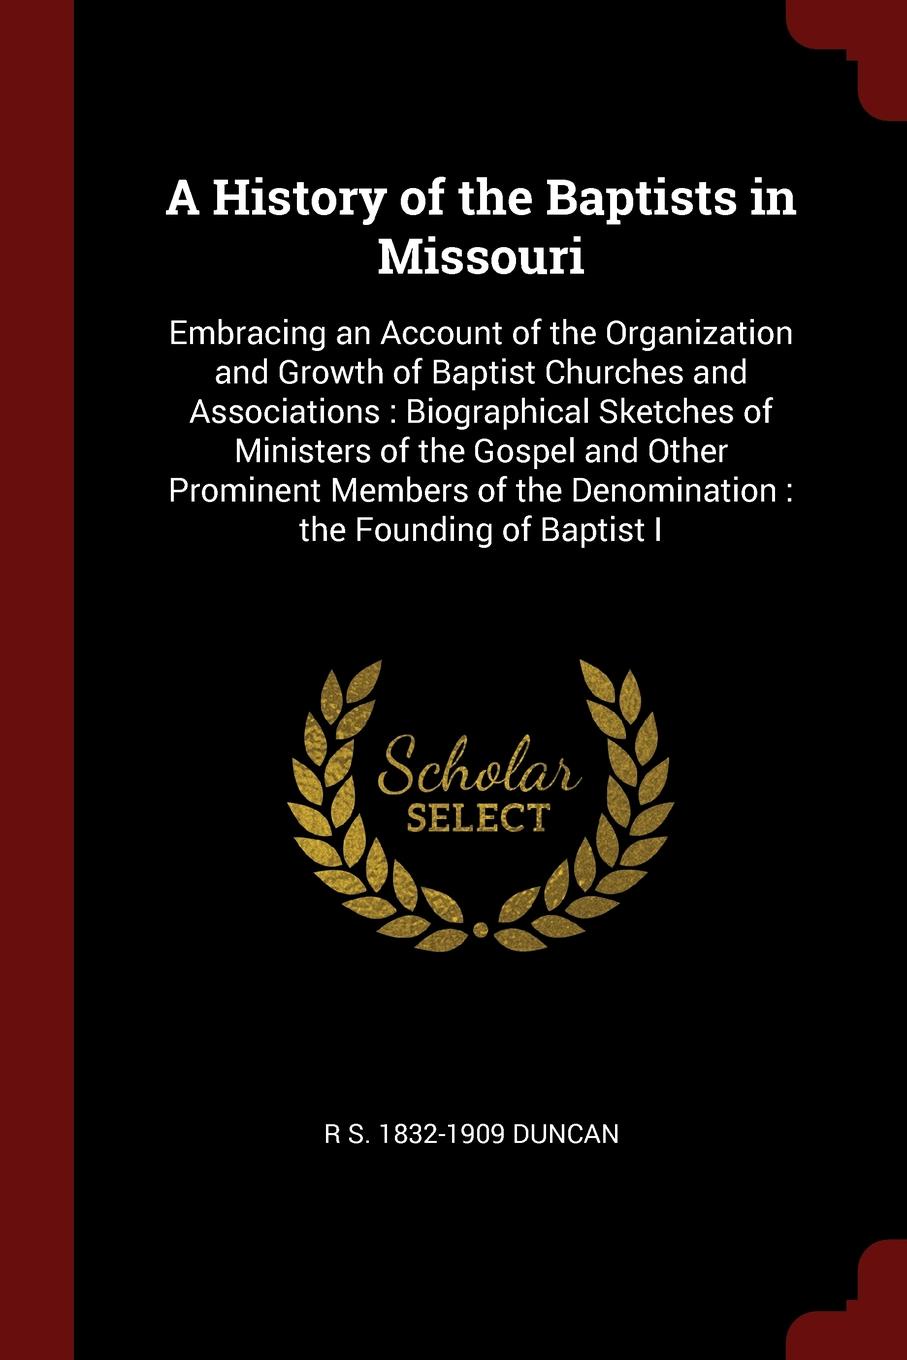 A History of the Baptists in Missouri. Embracing an Account of the Organization and Growth of Baptist Churches and Associations : Biographical Sketches of Ministers of the Gospel and Other Prominent Members of the Denomination : the Founding of Ba...